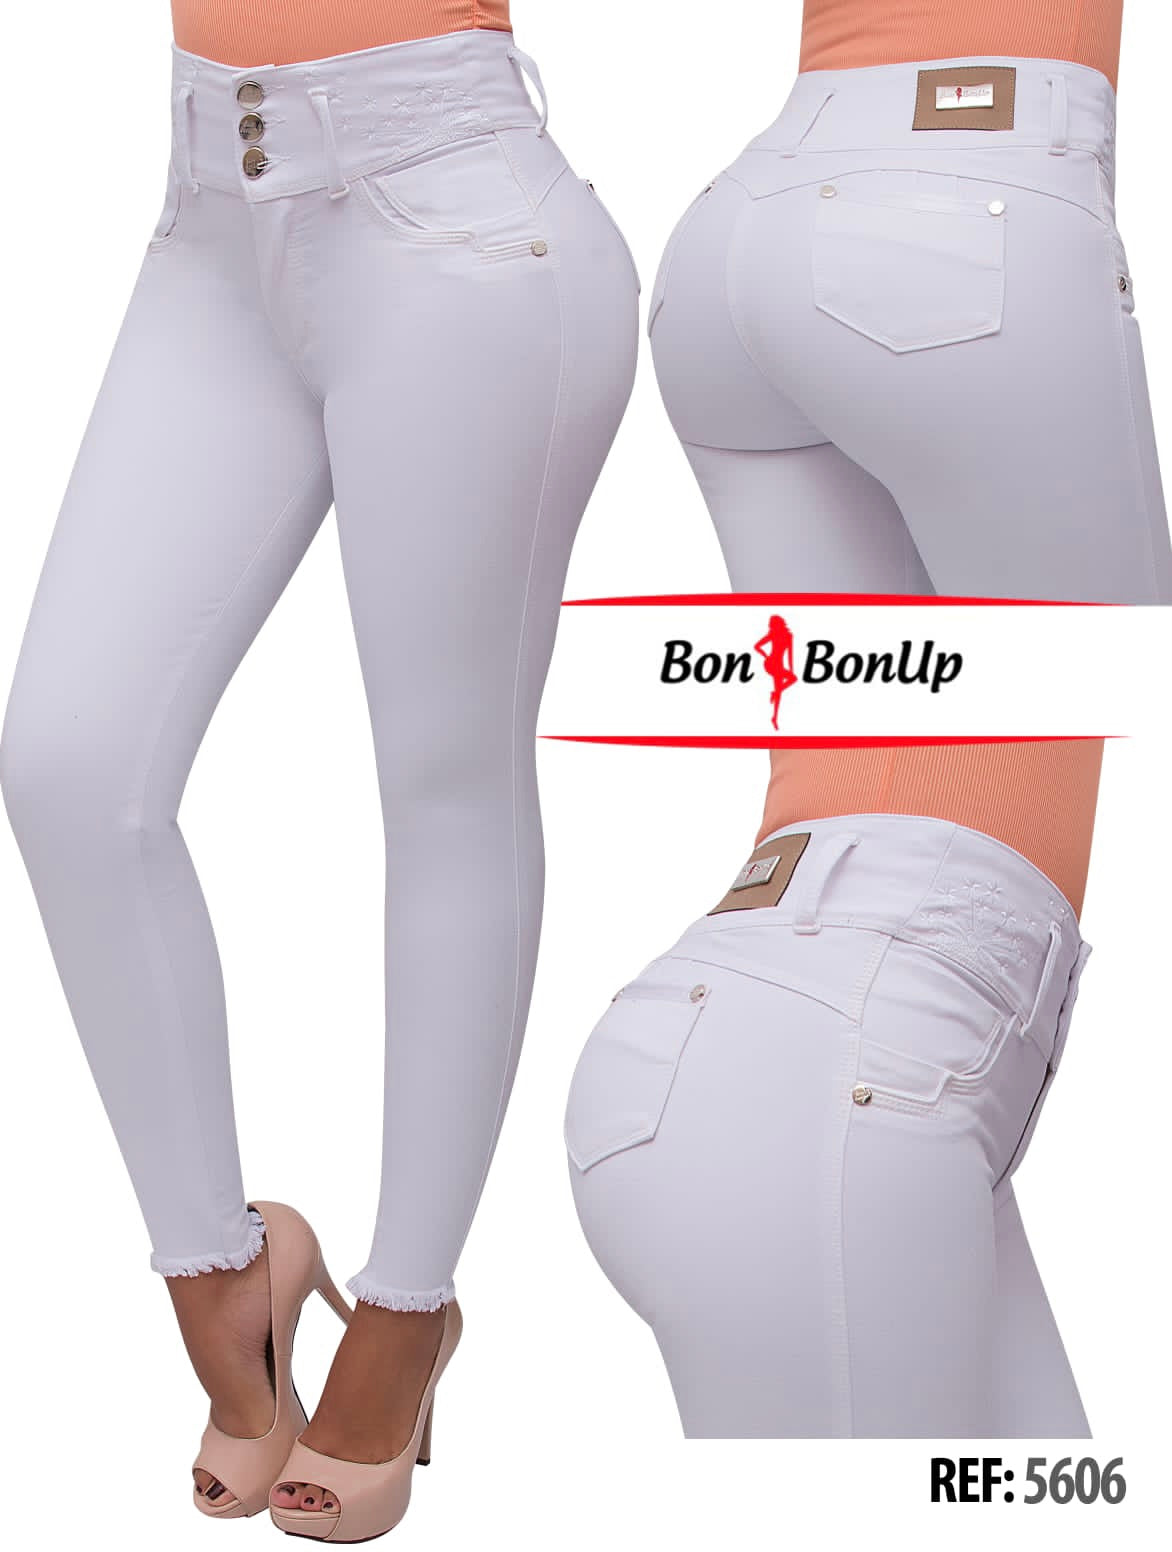 5606 BonBonUp High Waisted, Booty Lifting Jeans – Shop Simply Shapely